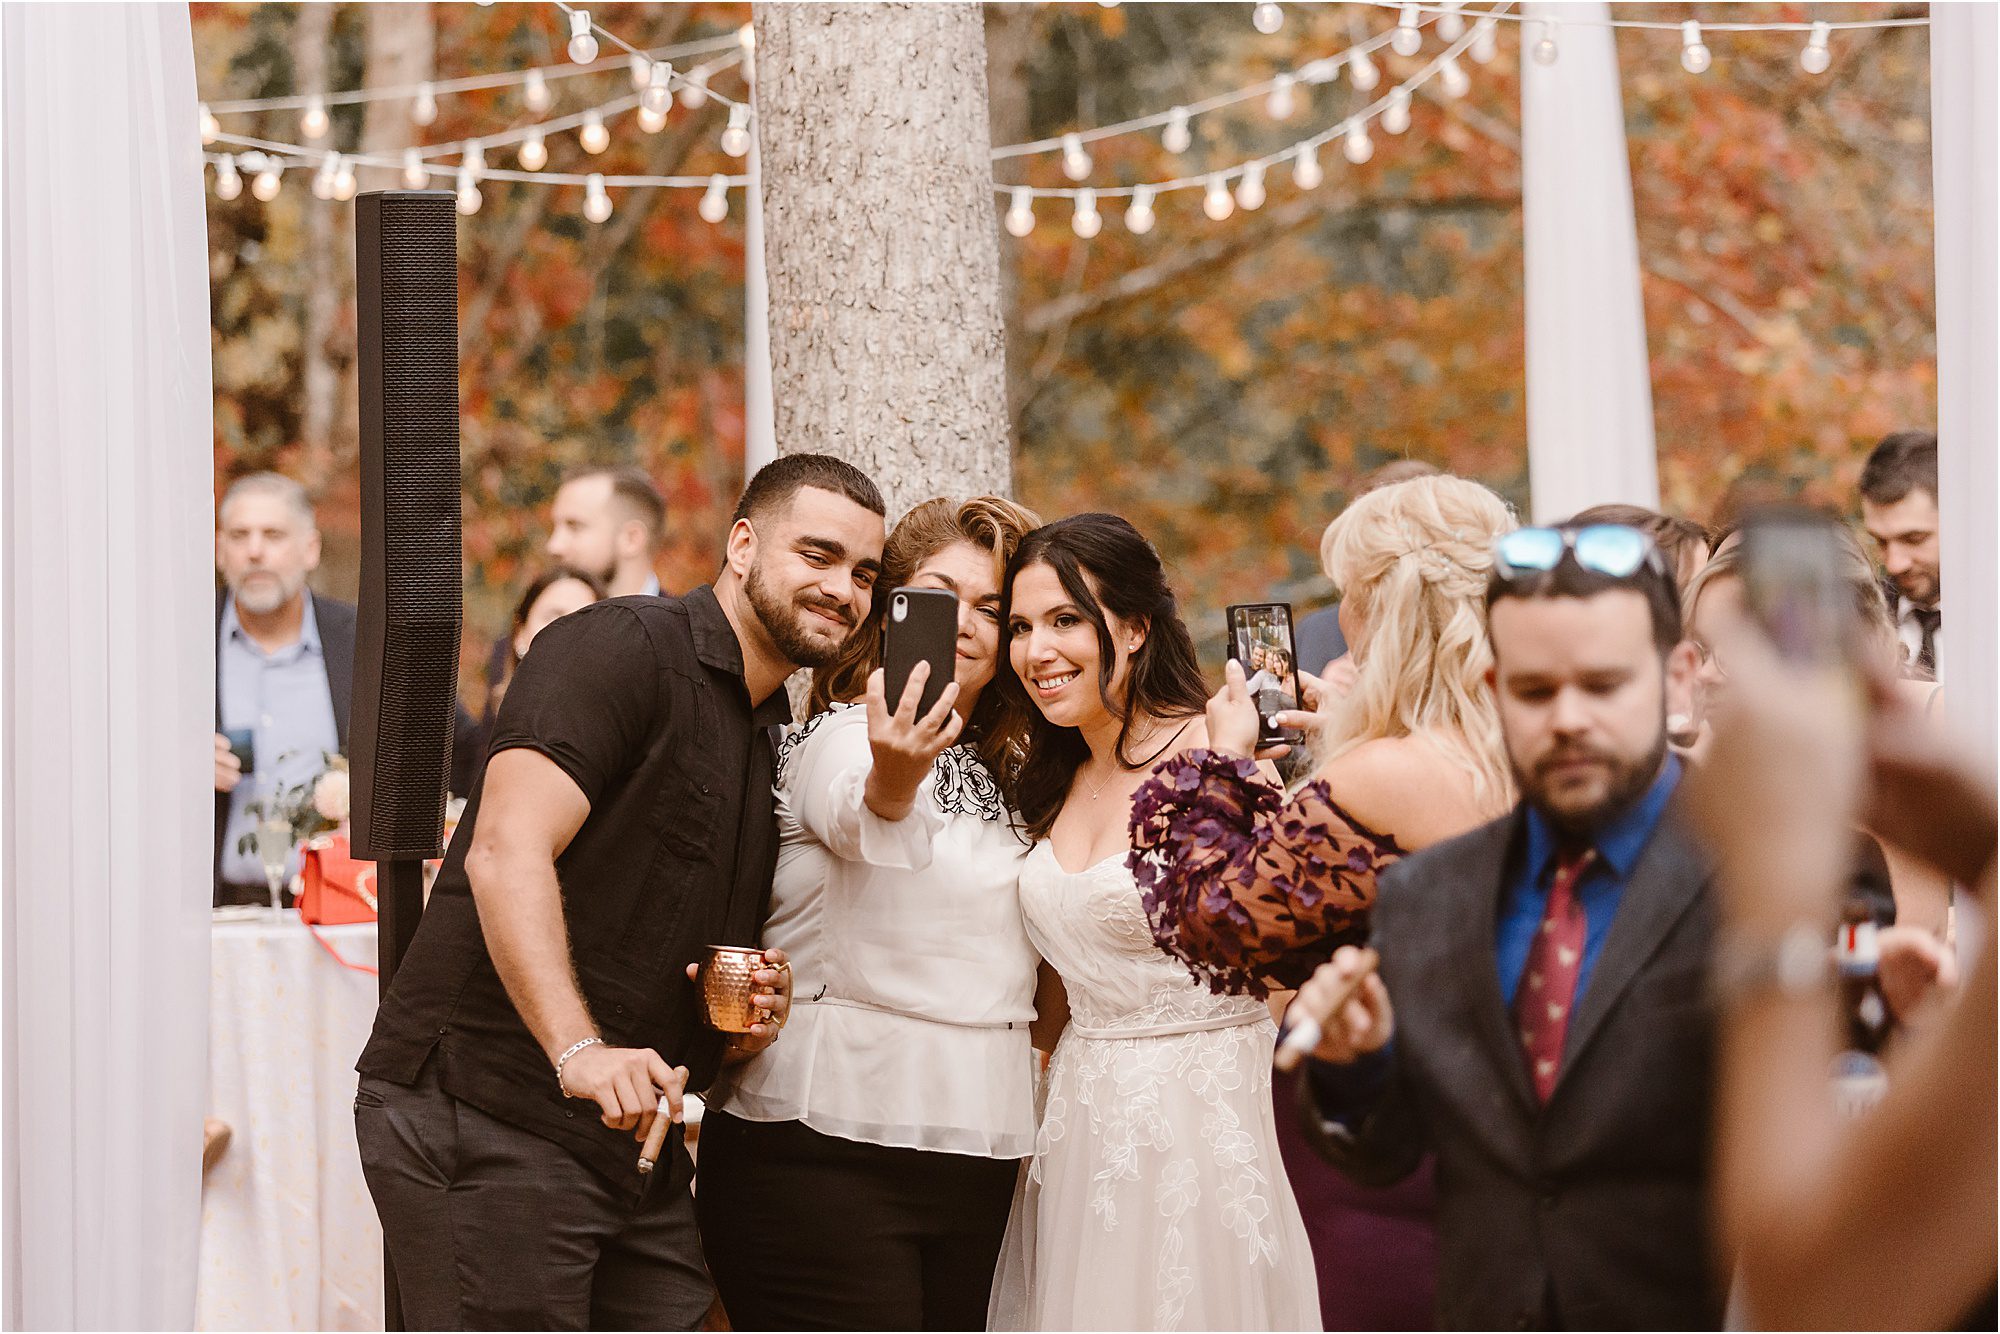 wedding guests take selfies with bride at wedding reception